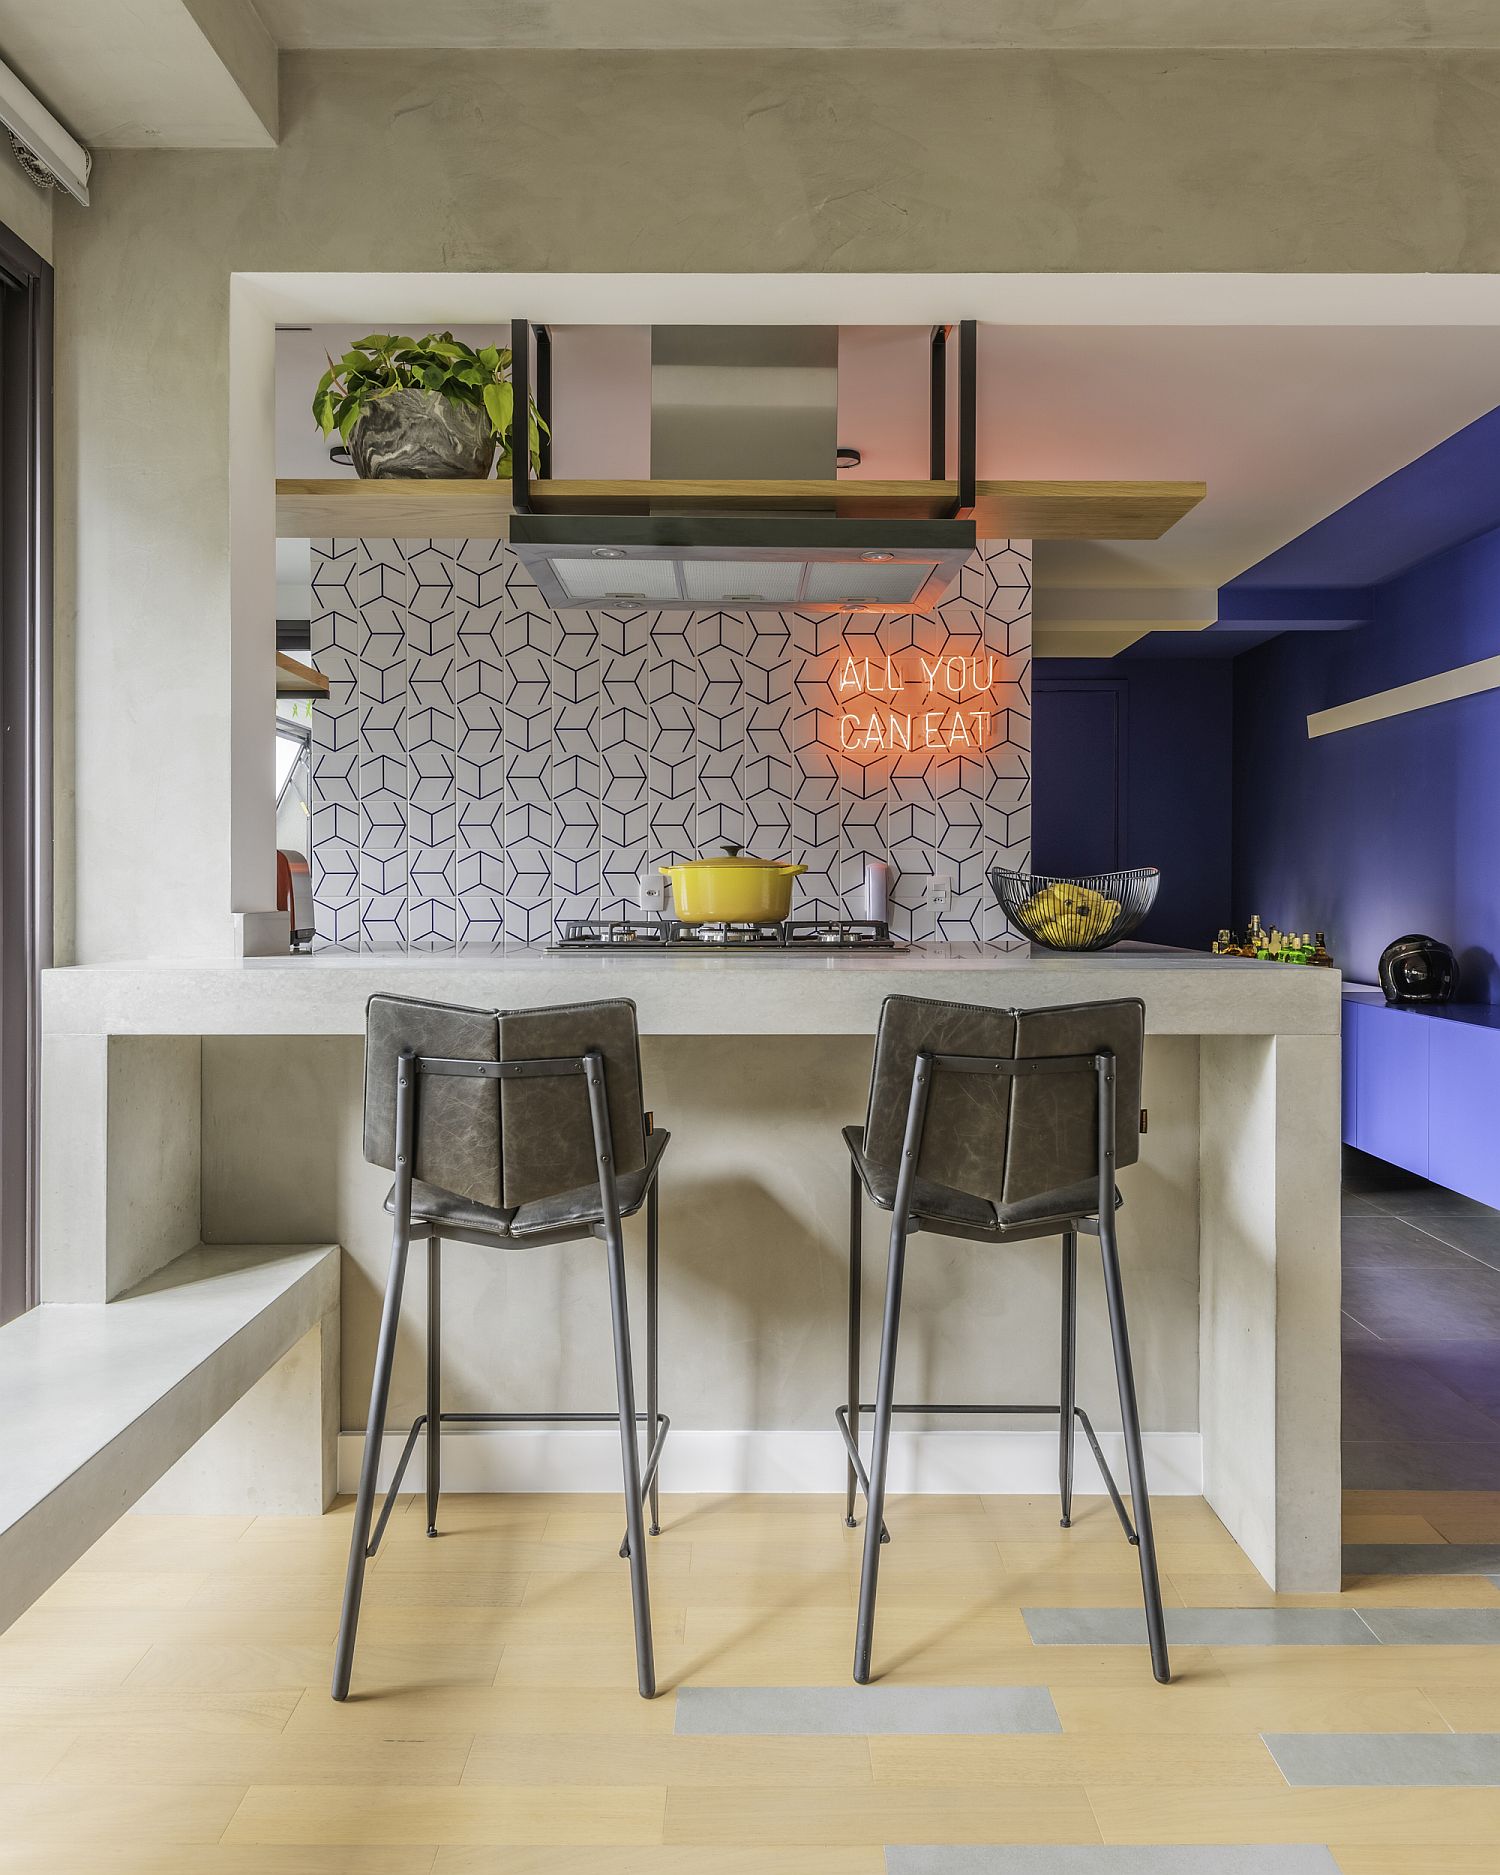 Bright-neon-sign-in-the-kitchen-is-a-fun-way-to-enliven-the-space-48679